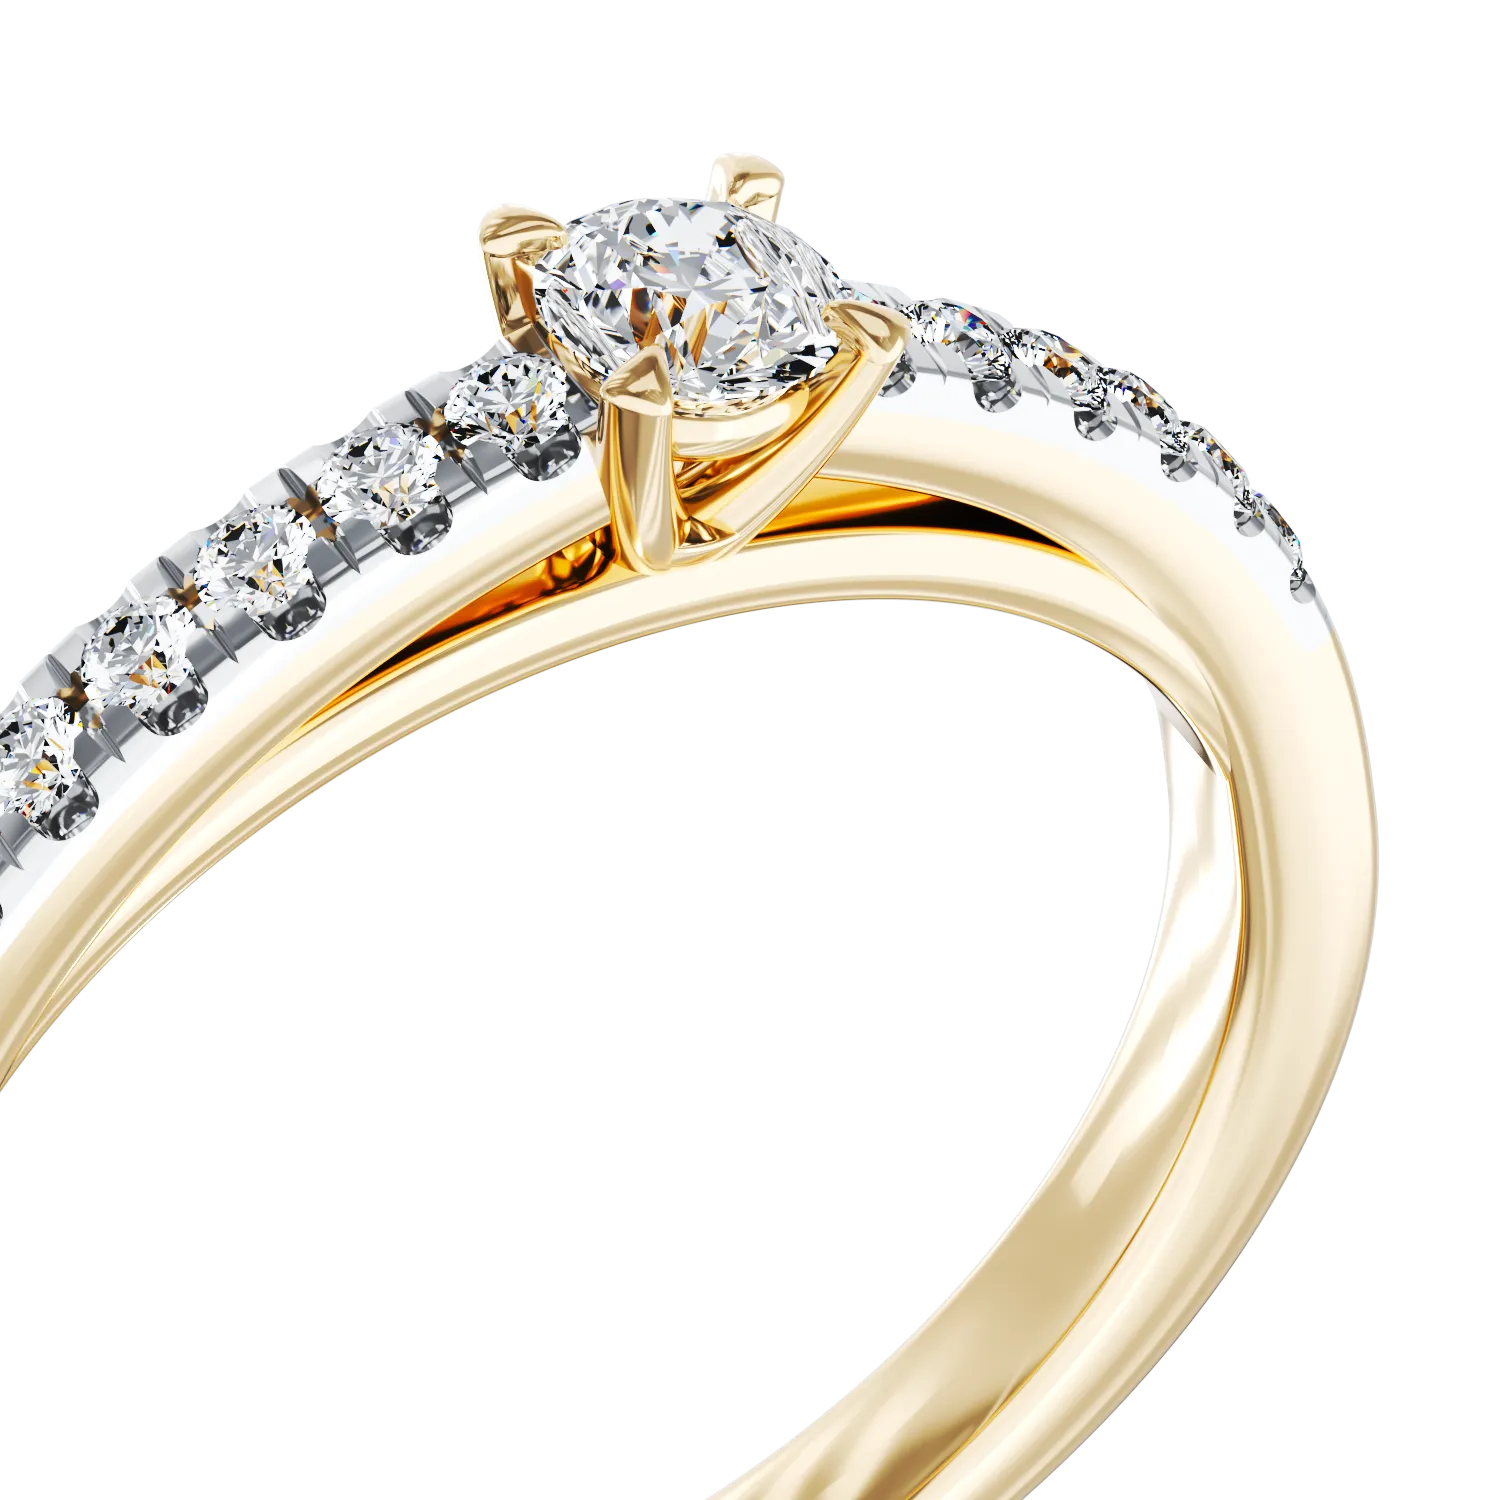 18K yellow gold engagement ring with 0.24ct diamond and 0.135ct diamonds